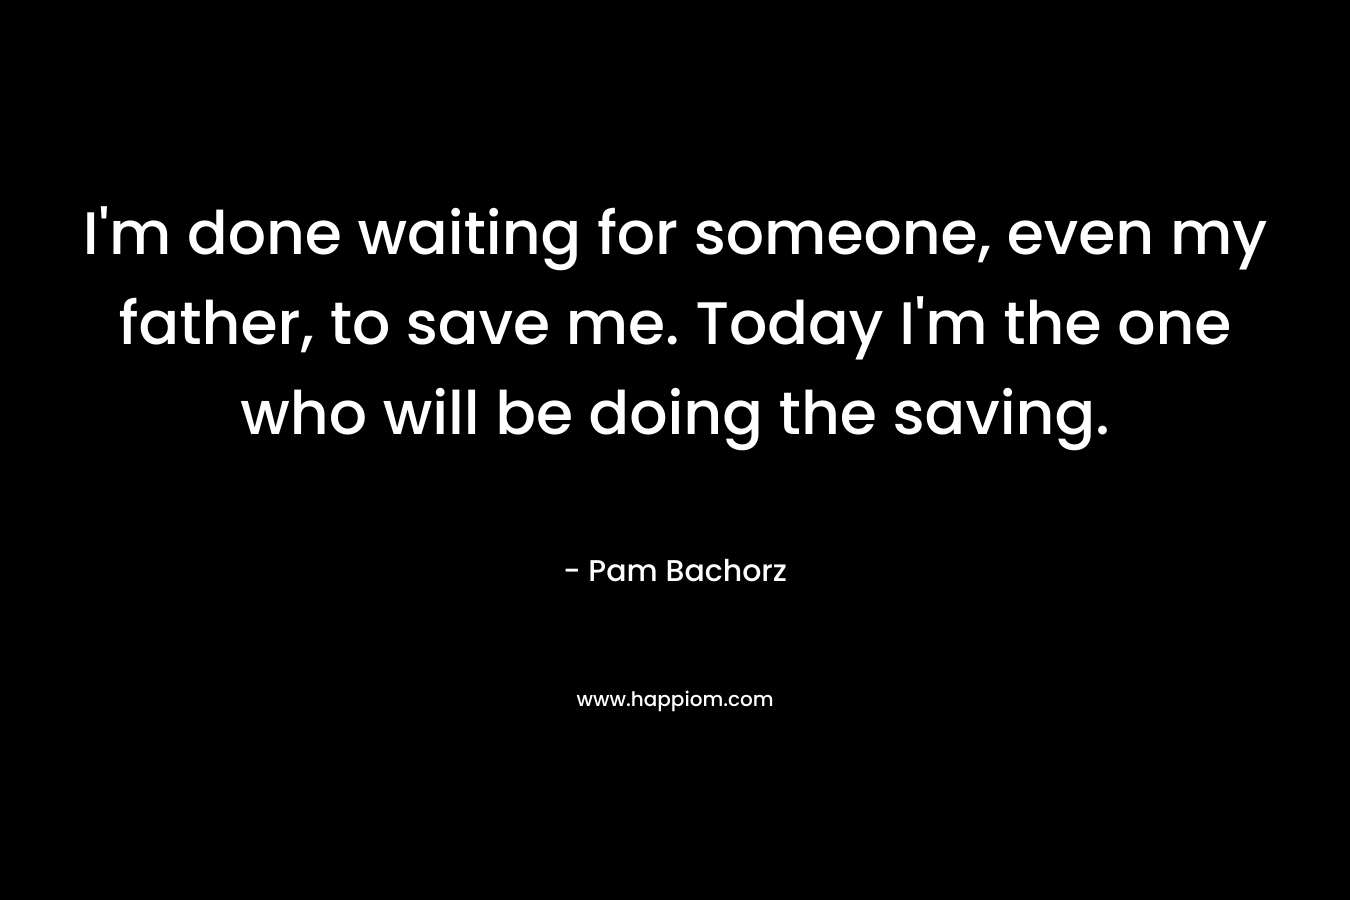 I’m done waiting for someone, even my father, to save me. Today I’m the one who will be doing the saving. – Pam Bachorz